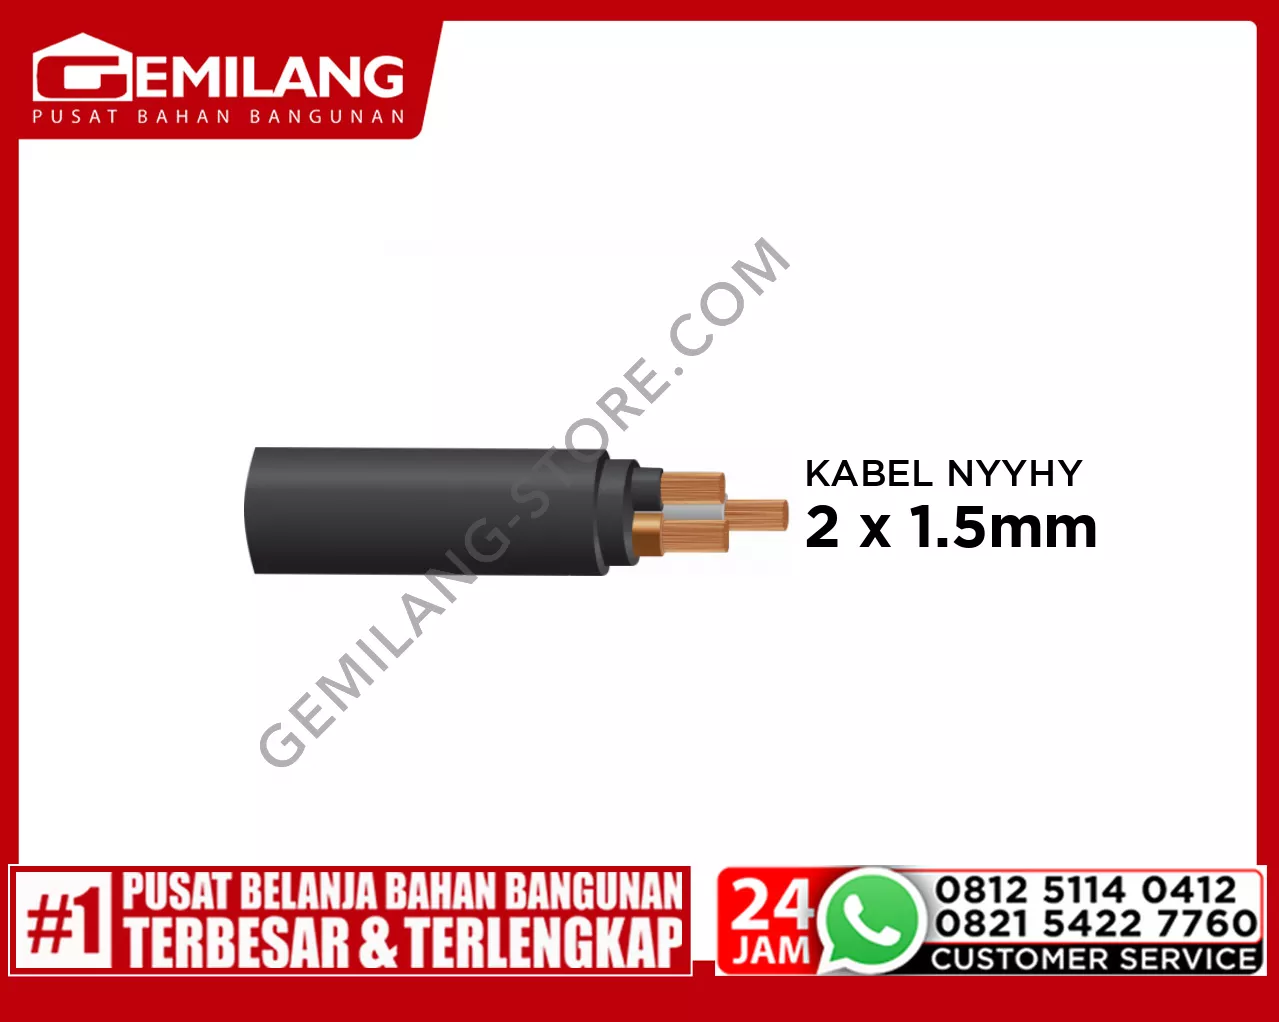 VOKSEL KABEL NYYHY 2 x 1.5mm @100mtr